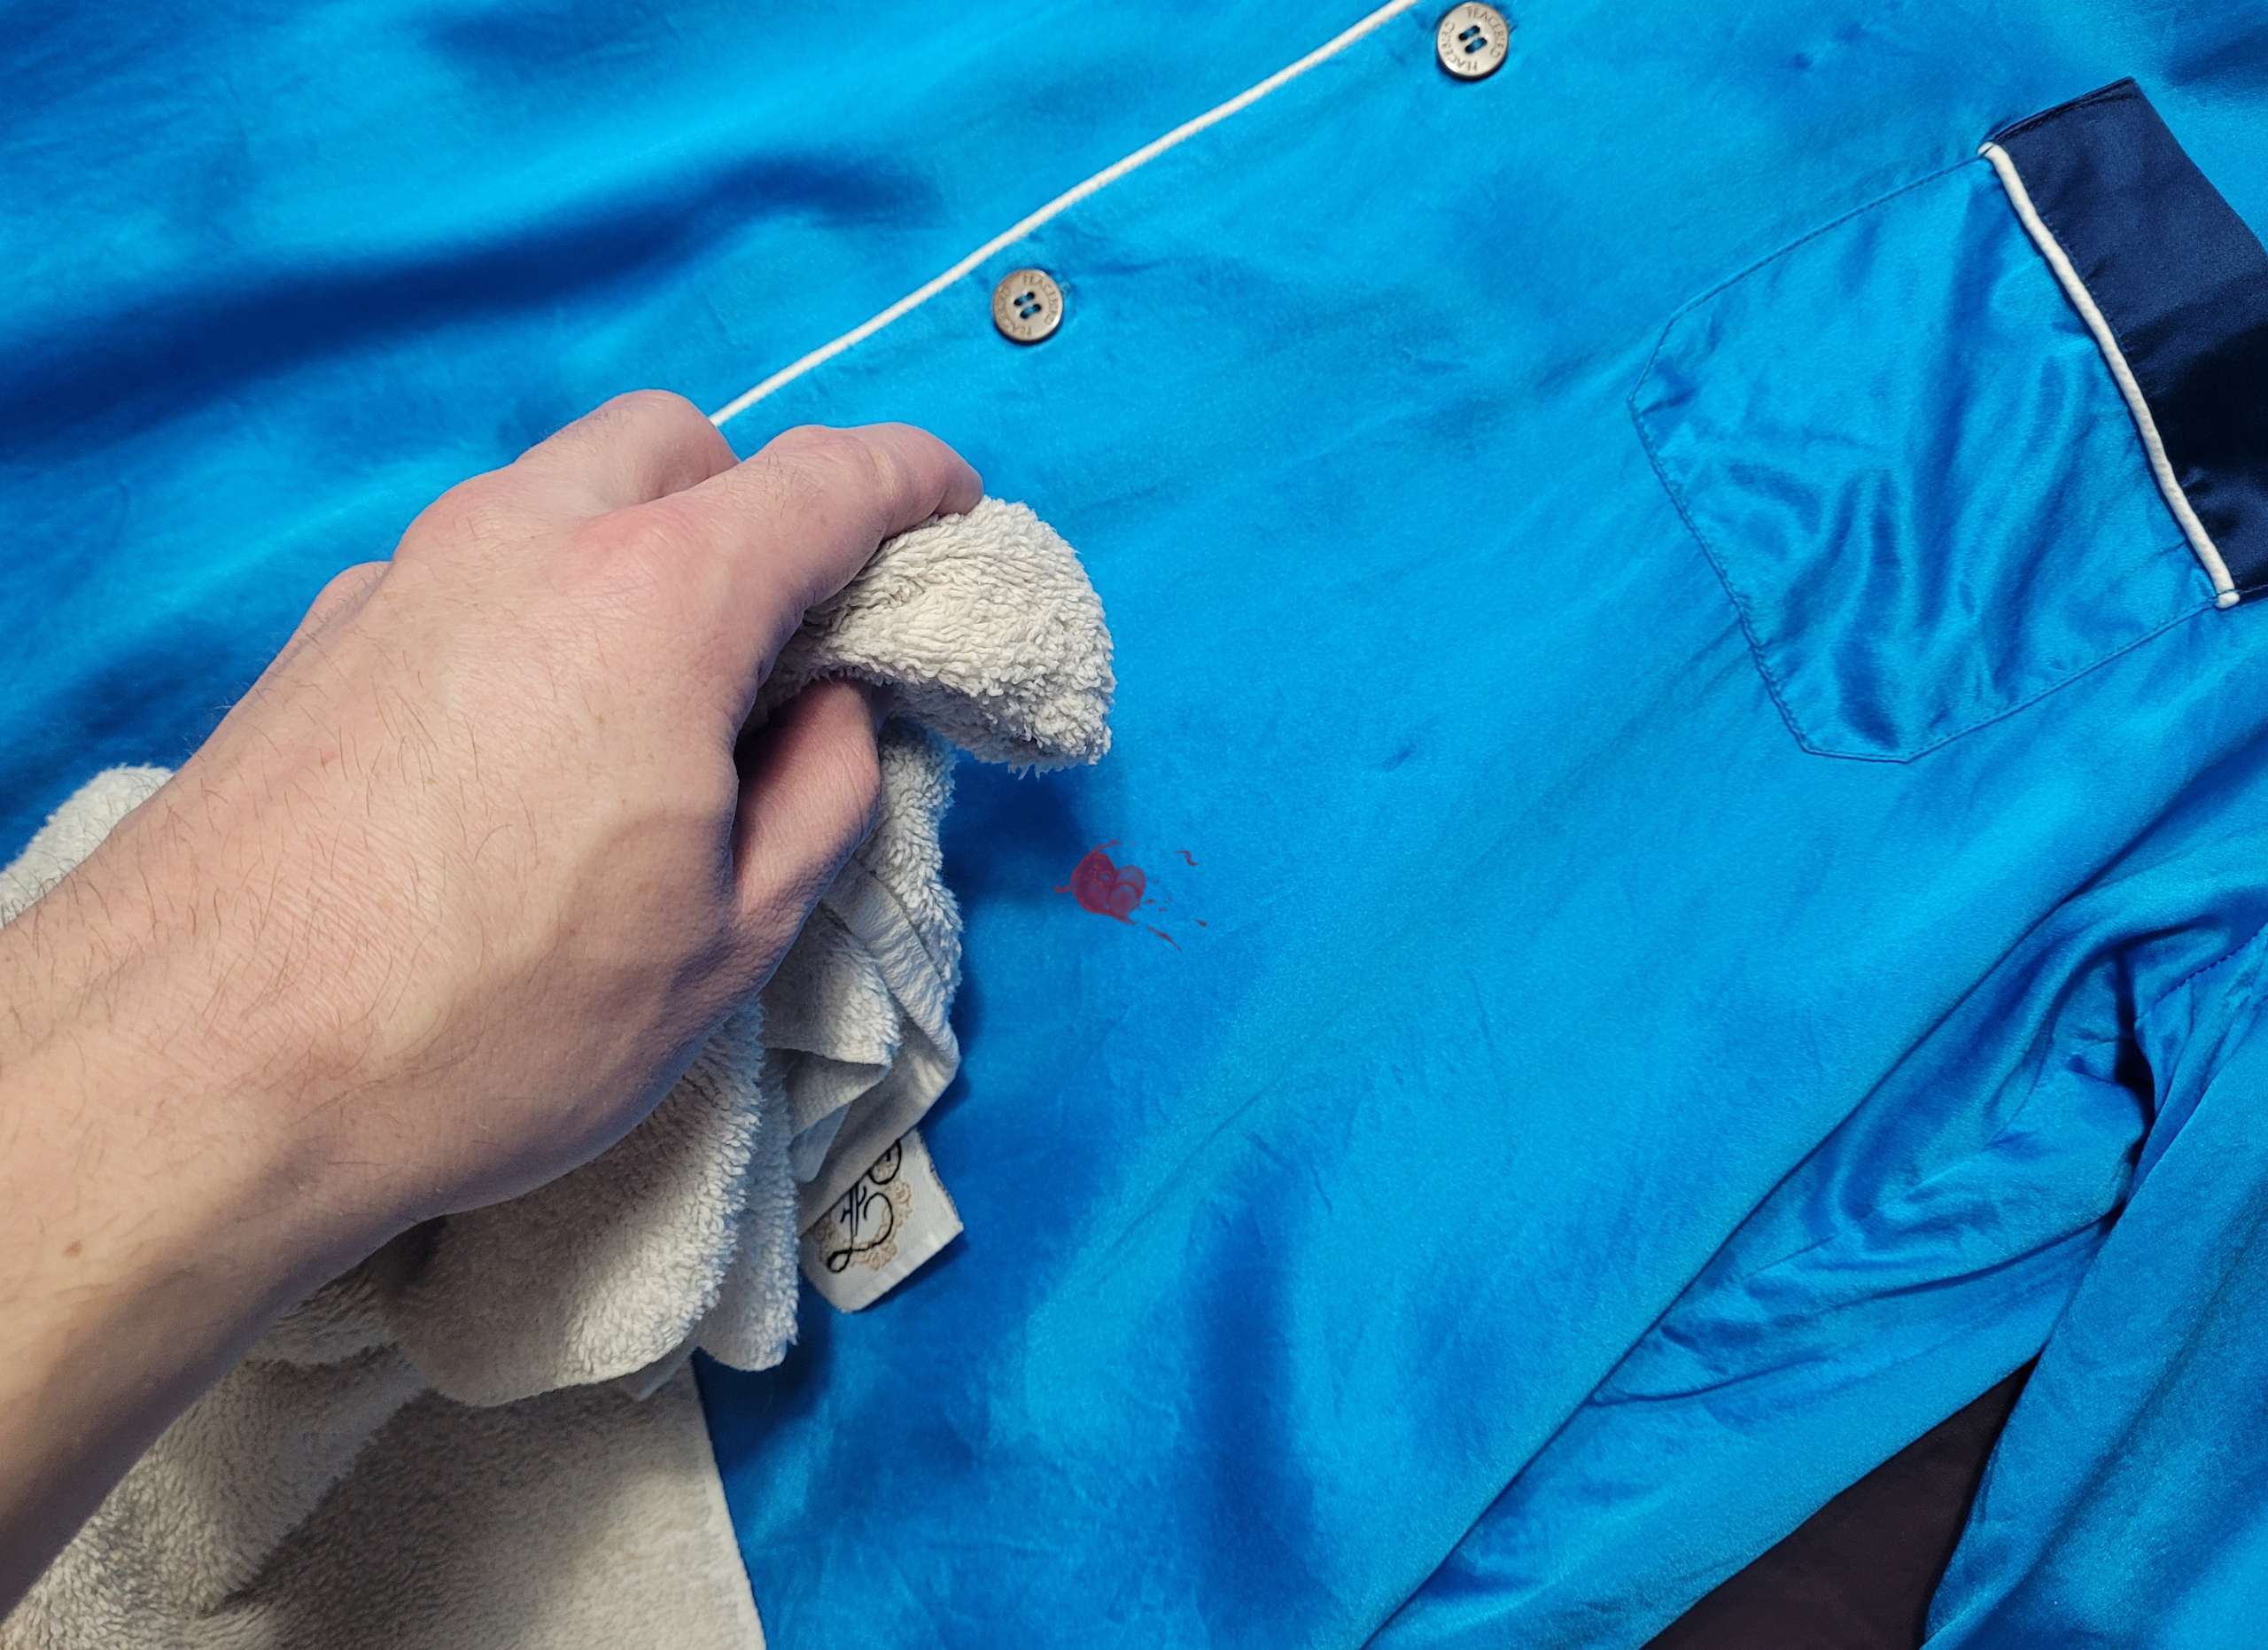 photo of a person using a cloth to dab a stain on silk pajamas